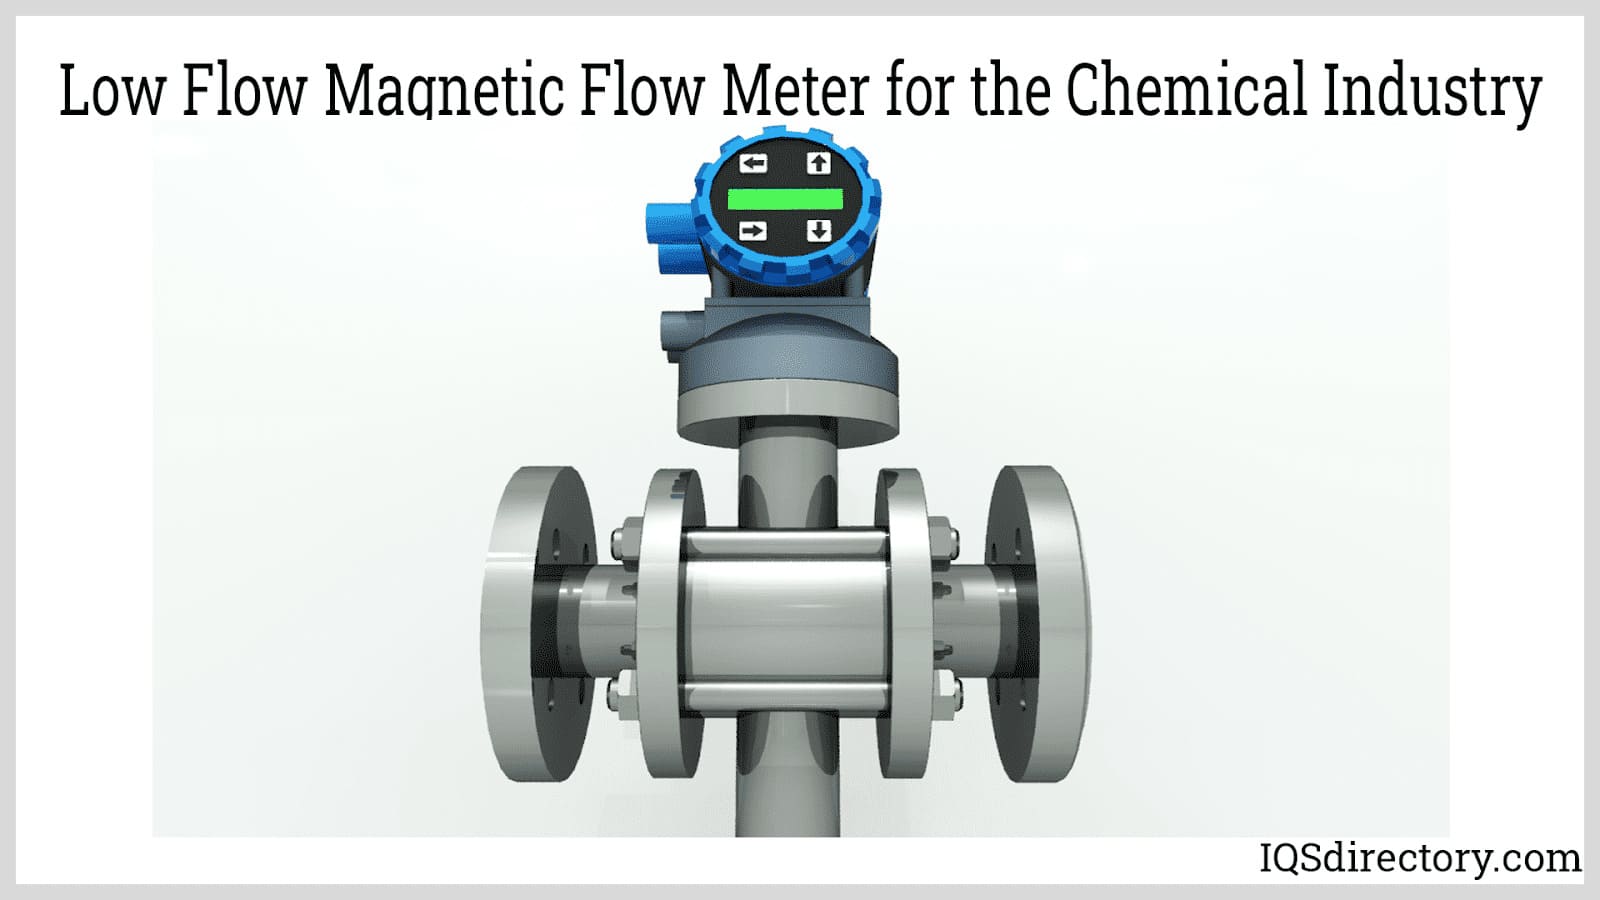 Magnetic Flow Meter: What Is It? How Does It Work? Uses